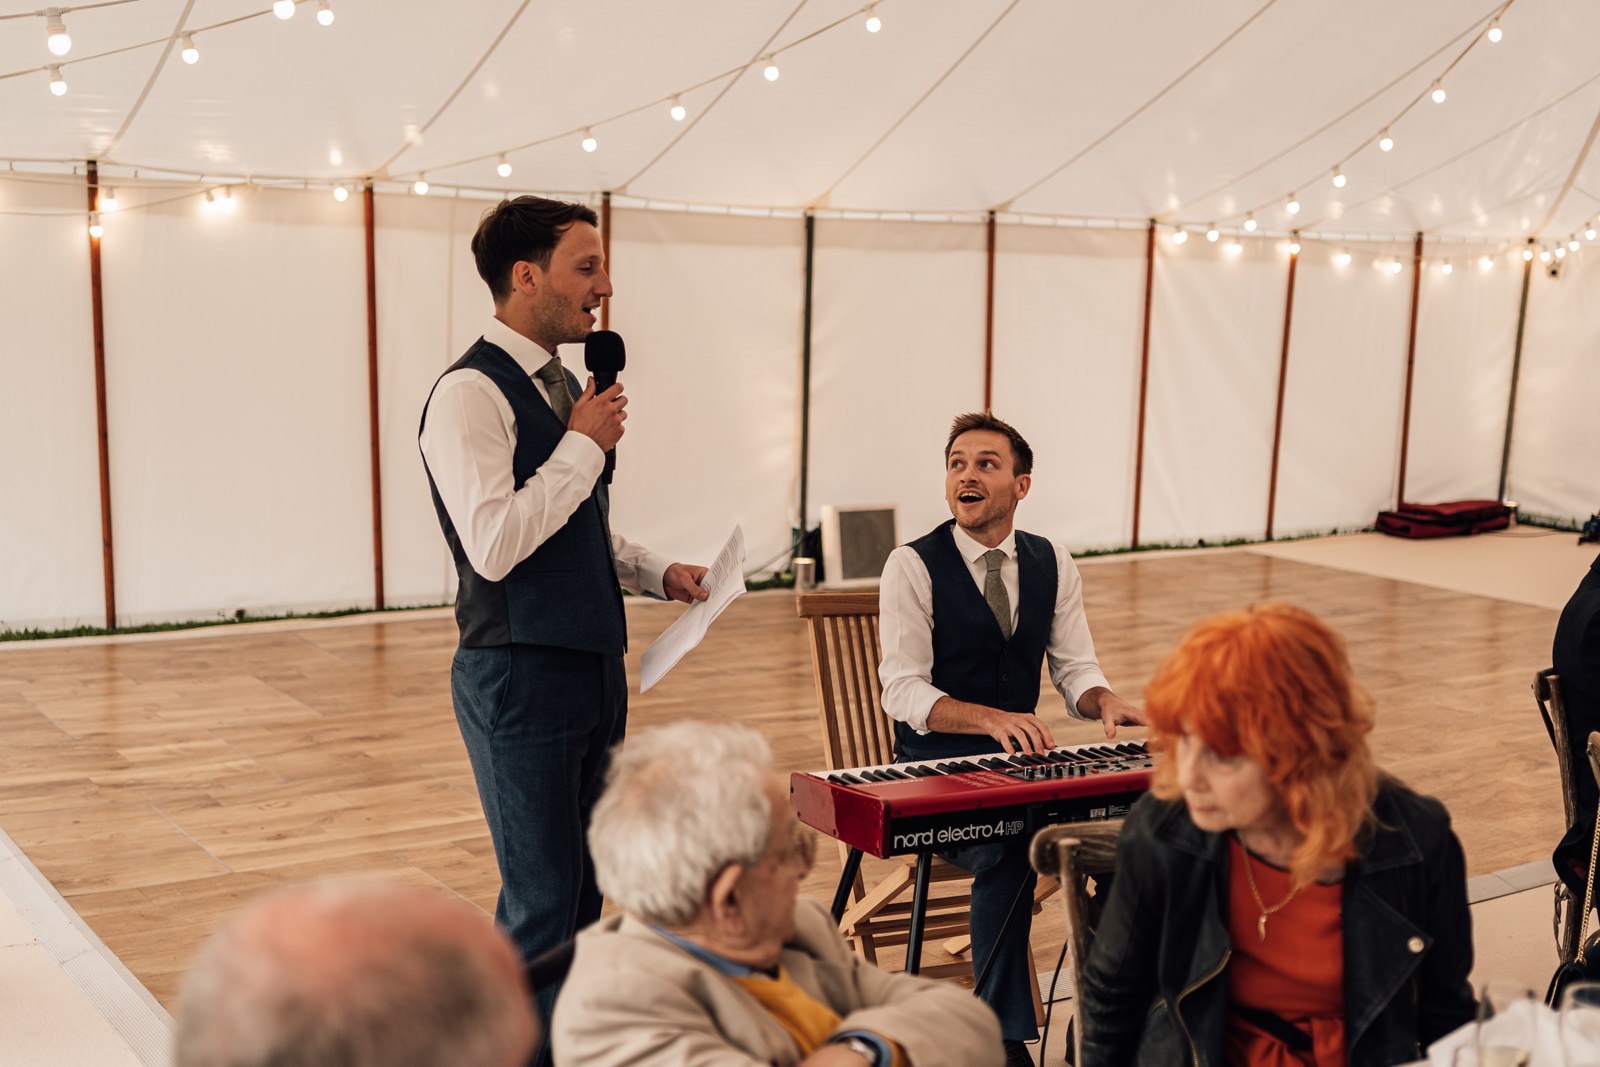 South Wales wedding speeches in marquee